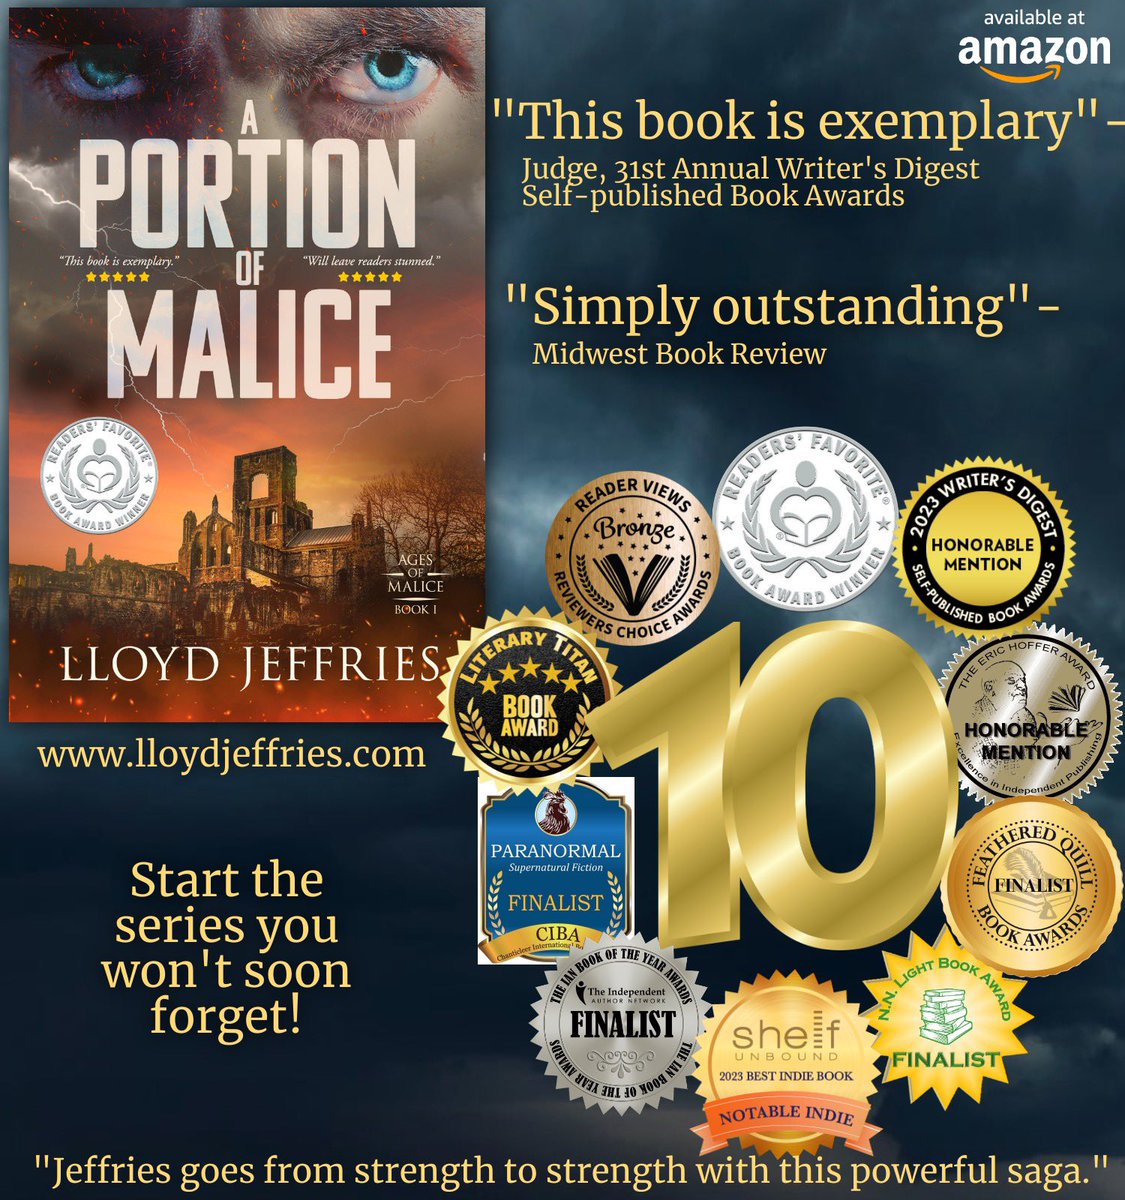 On sale now!

Predictability defied.
Start the epic you won’t soon forget!

A Portion of Malice, Ages of Malice book 1.

“Riveting!”
“A master storyteller!”
“A punch in the gut!”

#mustread #unforgettable #religiousmystery #thriller
amazon.com/dp/B0BHXPDHYL